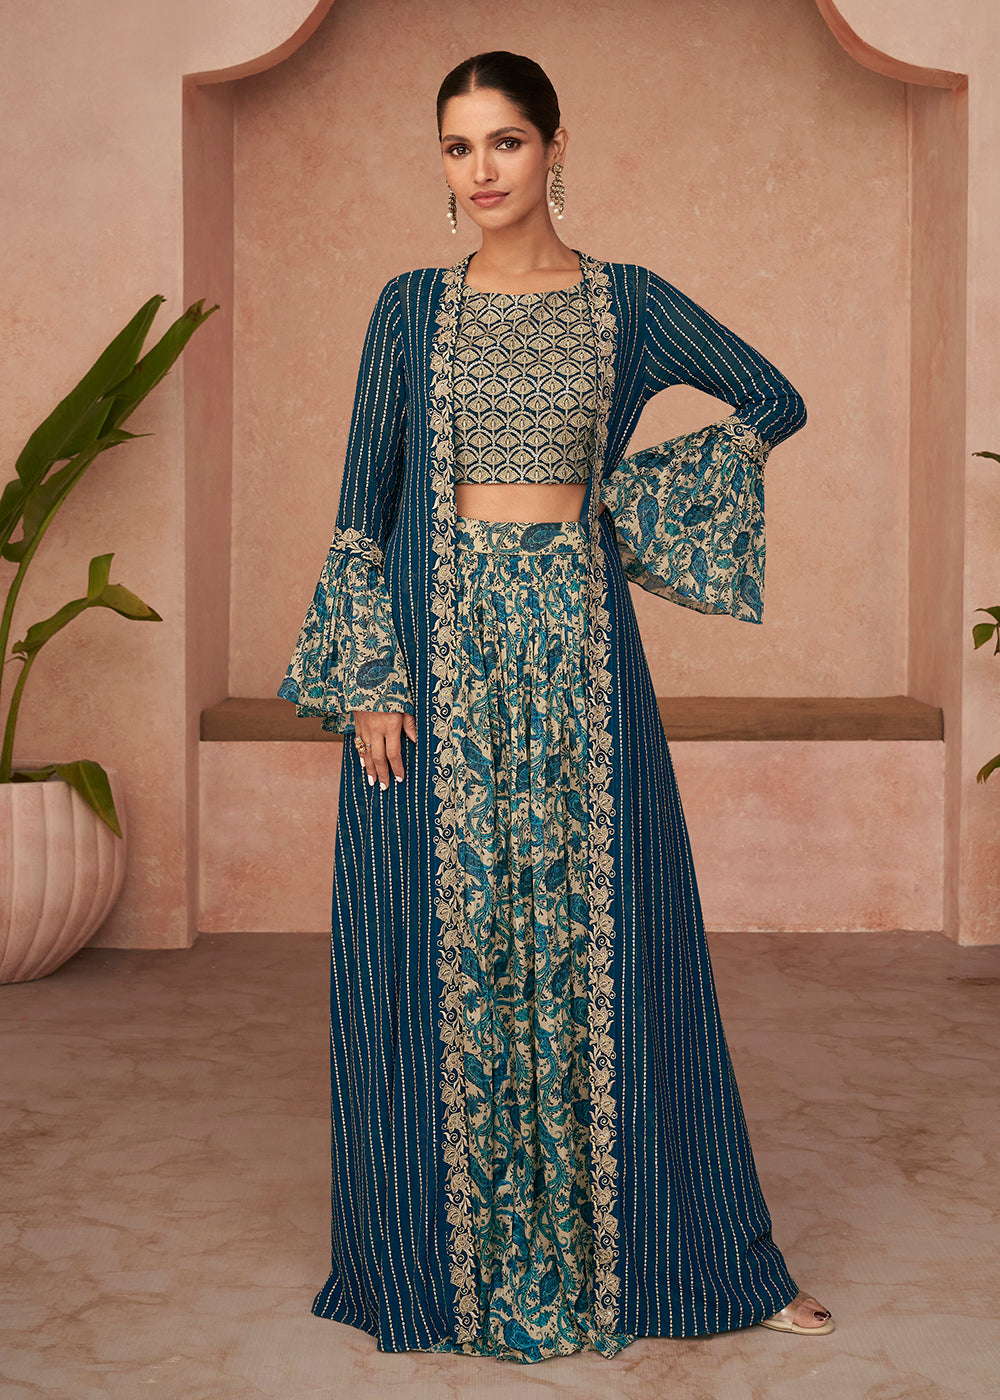 Buy Now Designer Teal Blue Jacket Style Indo-Western Palazzo Suit Online in USA, UK, Canada, Germany & Worldwide at Empress Clothing. 